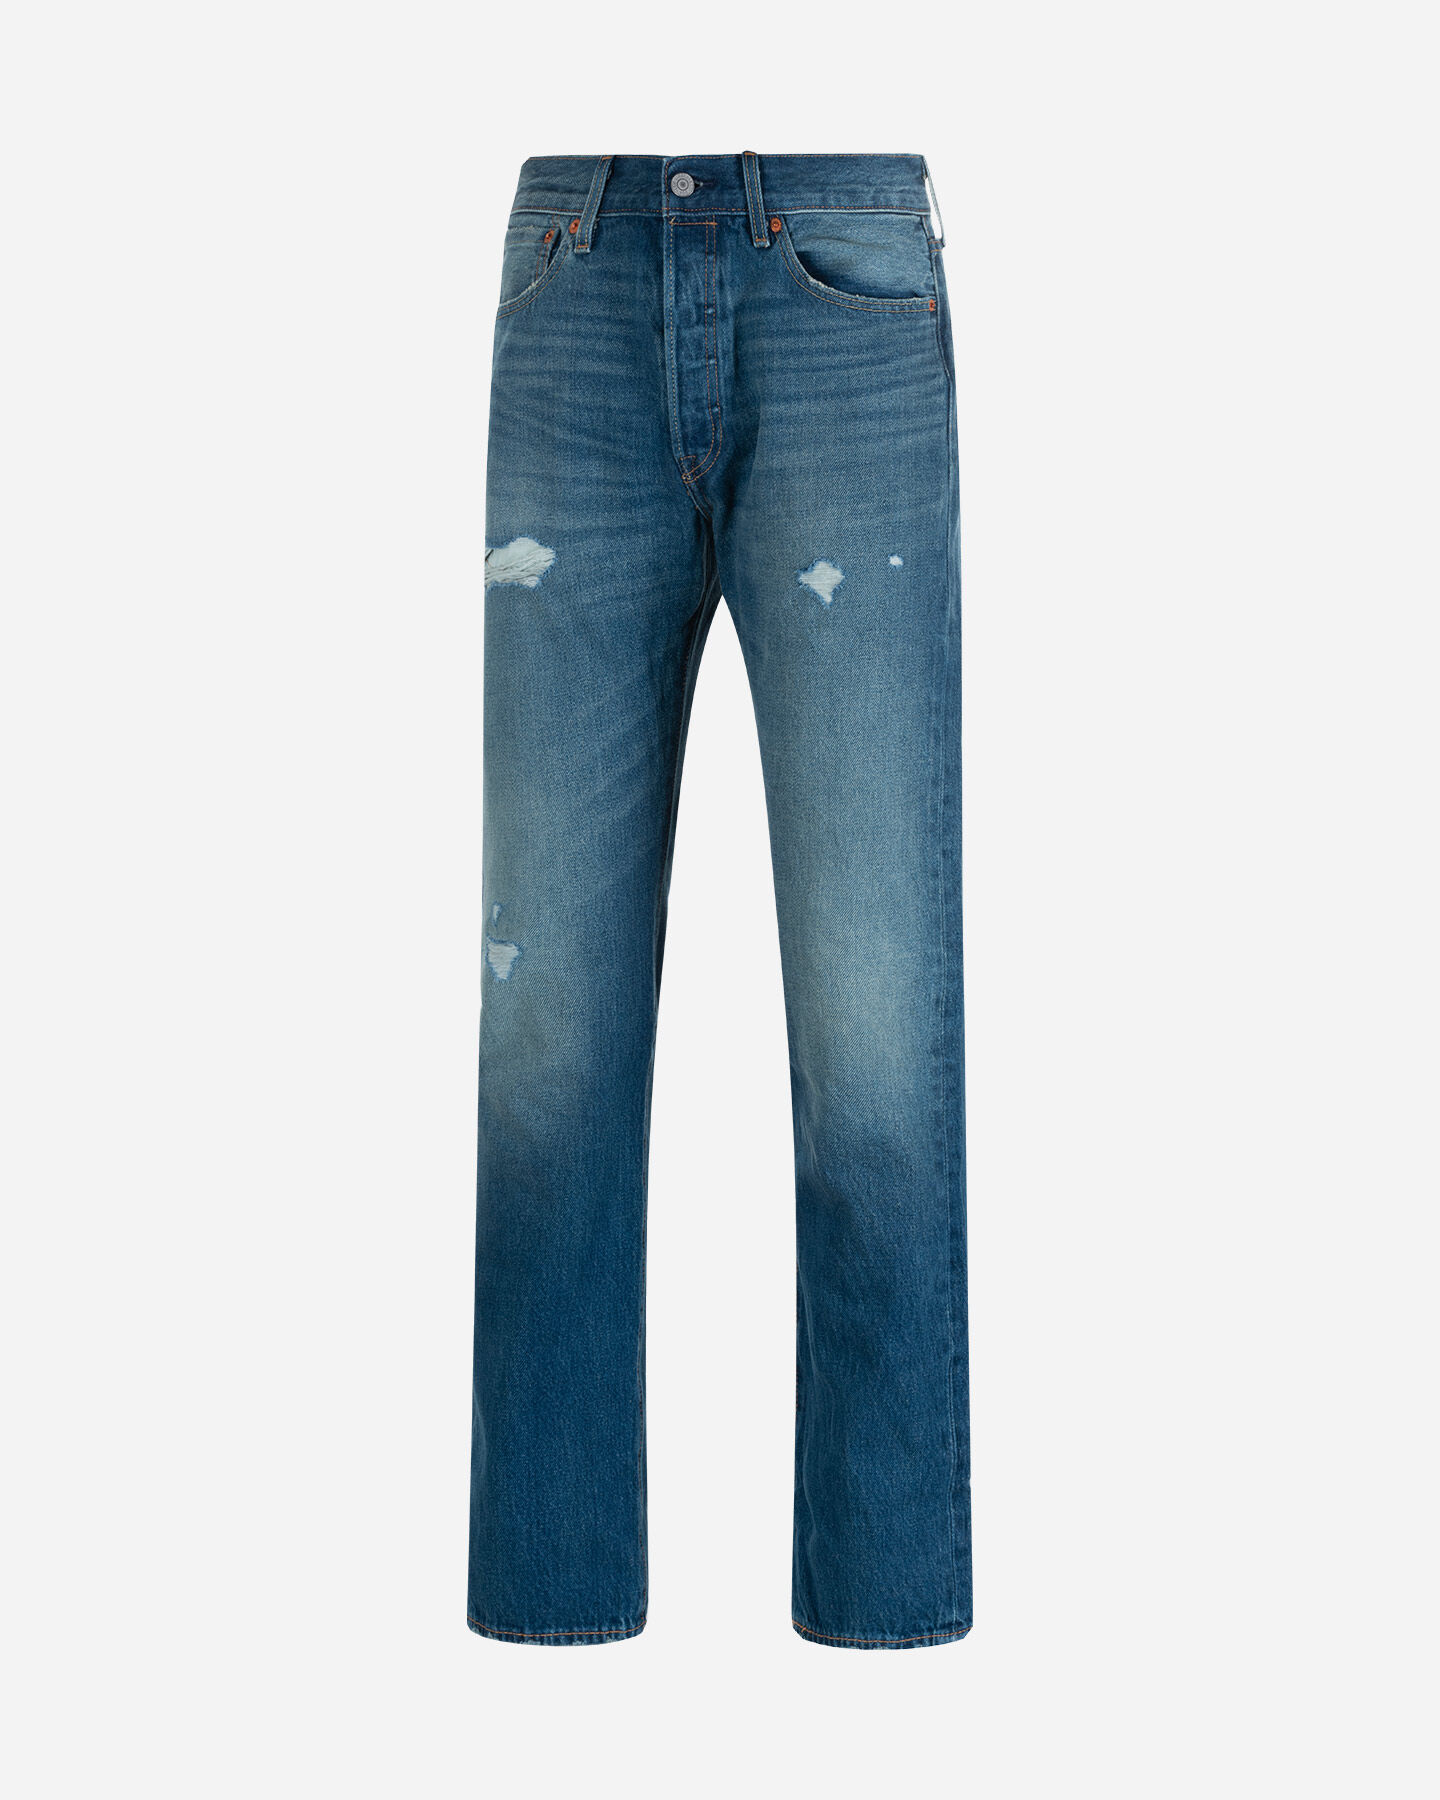  Jeans LEVI'S 501 REGULAR M S4122316|3383|32 scatto 0